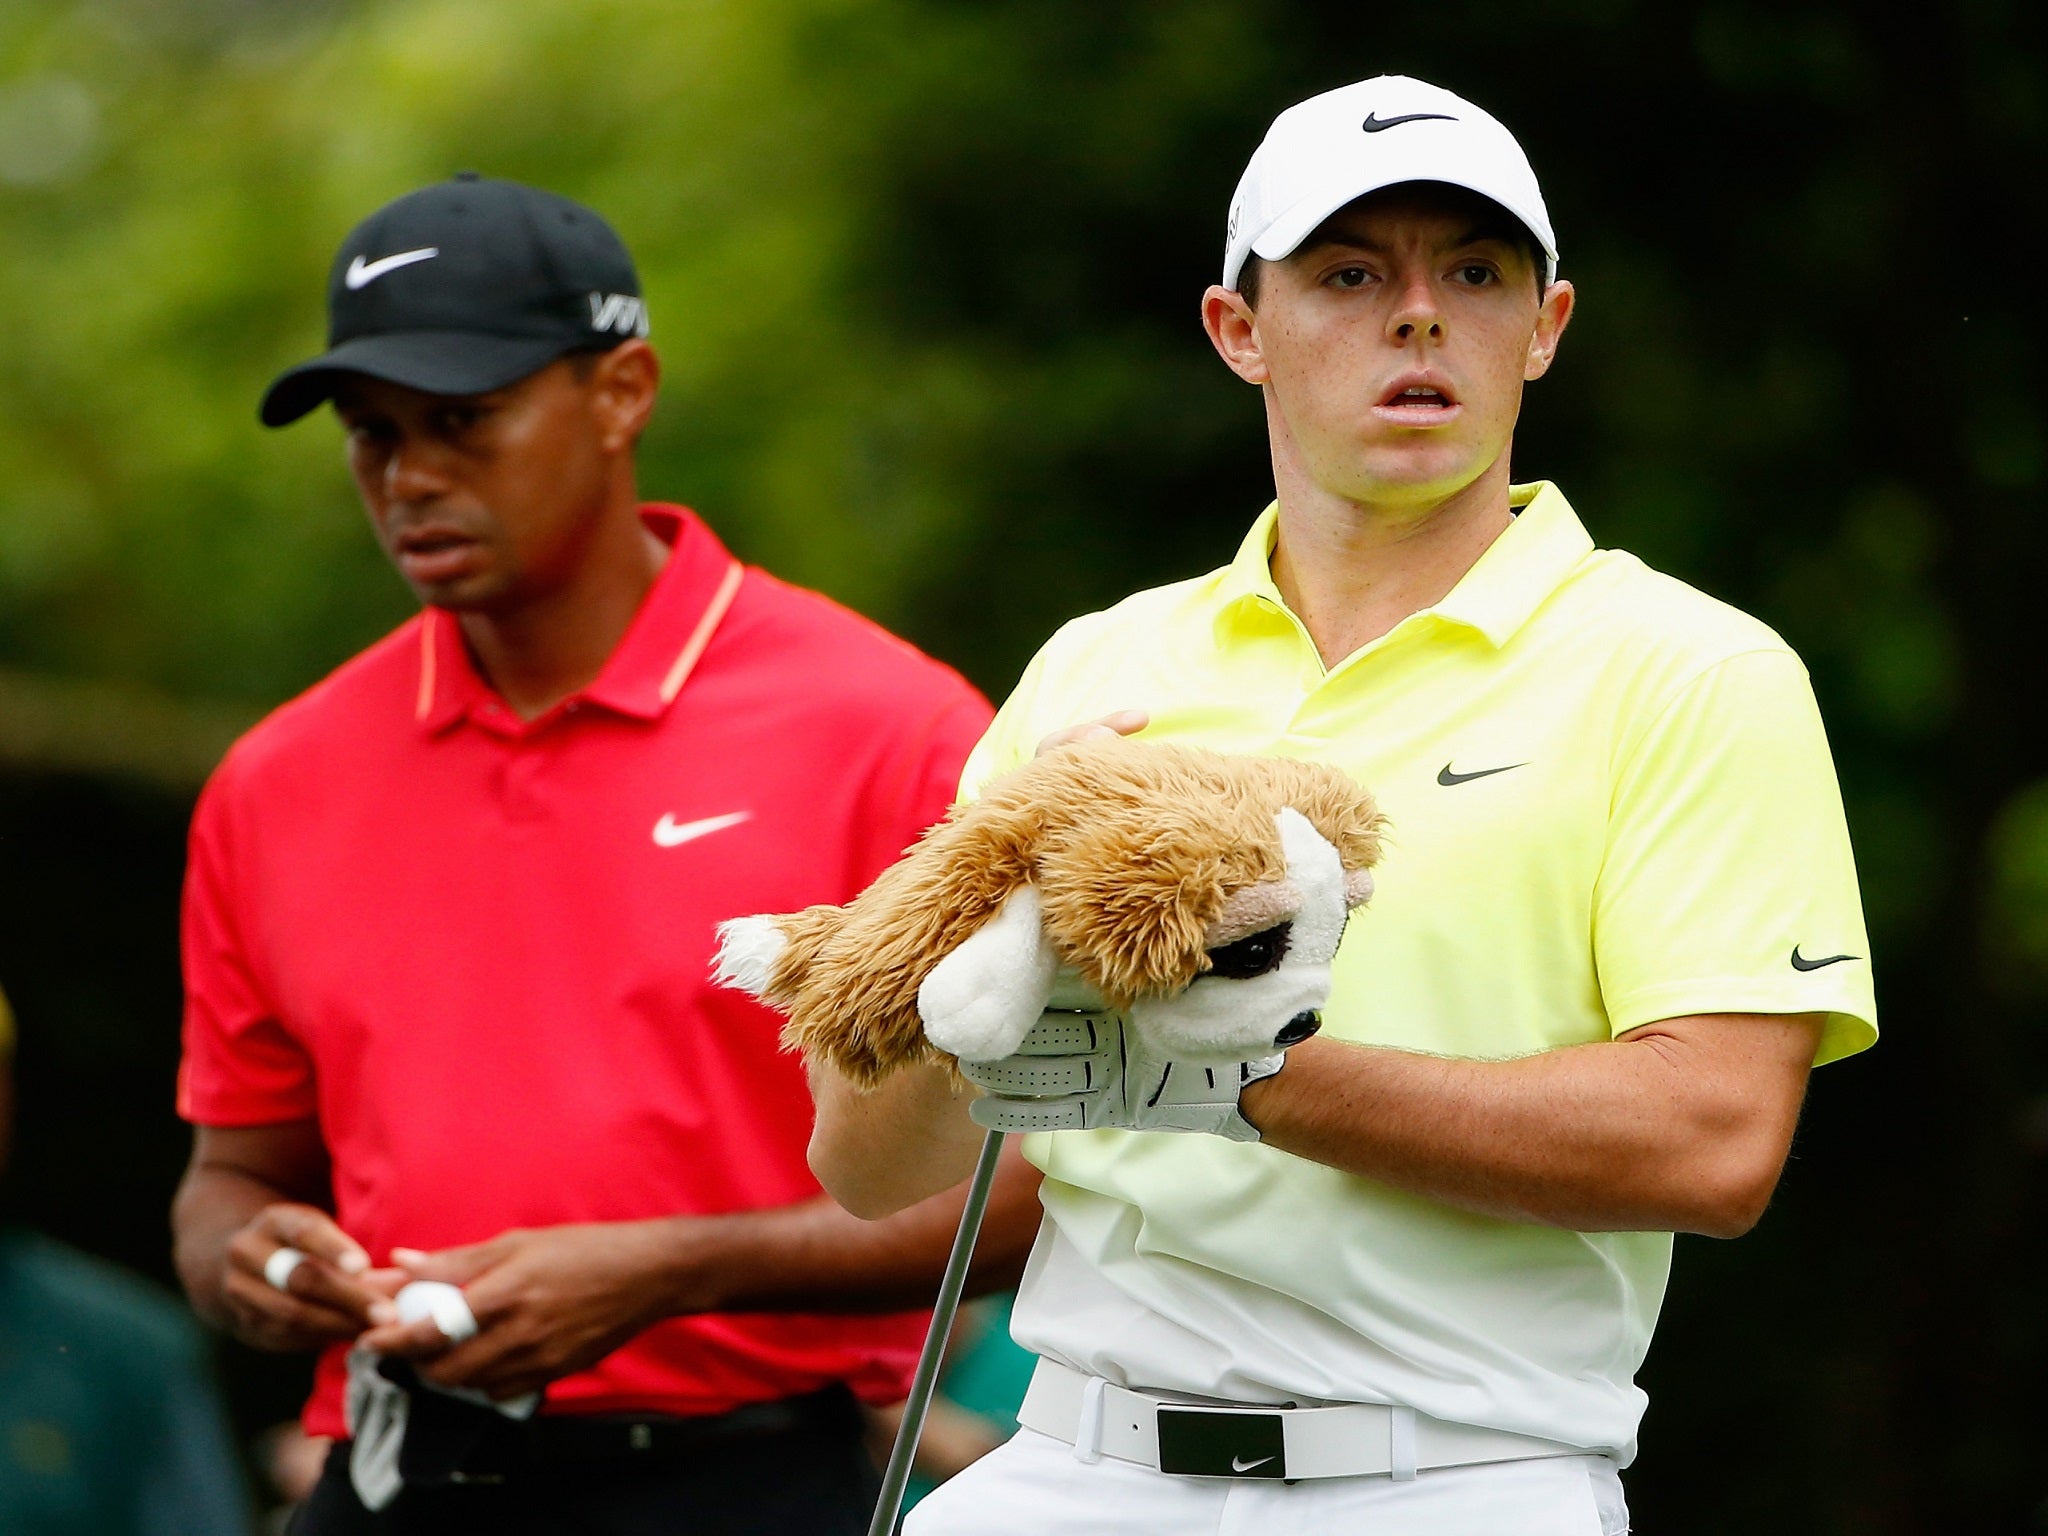 Tiger Woods and Rory McIlroy fell out of contention on the final day early on